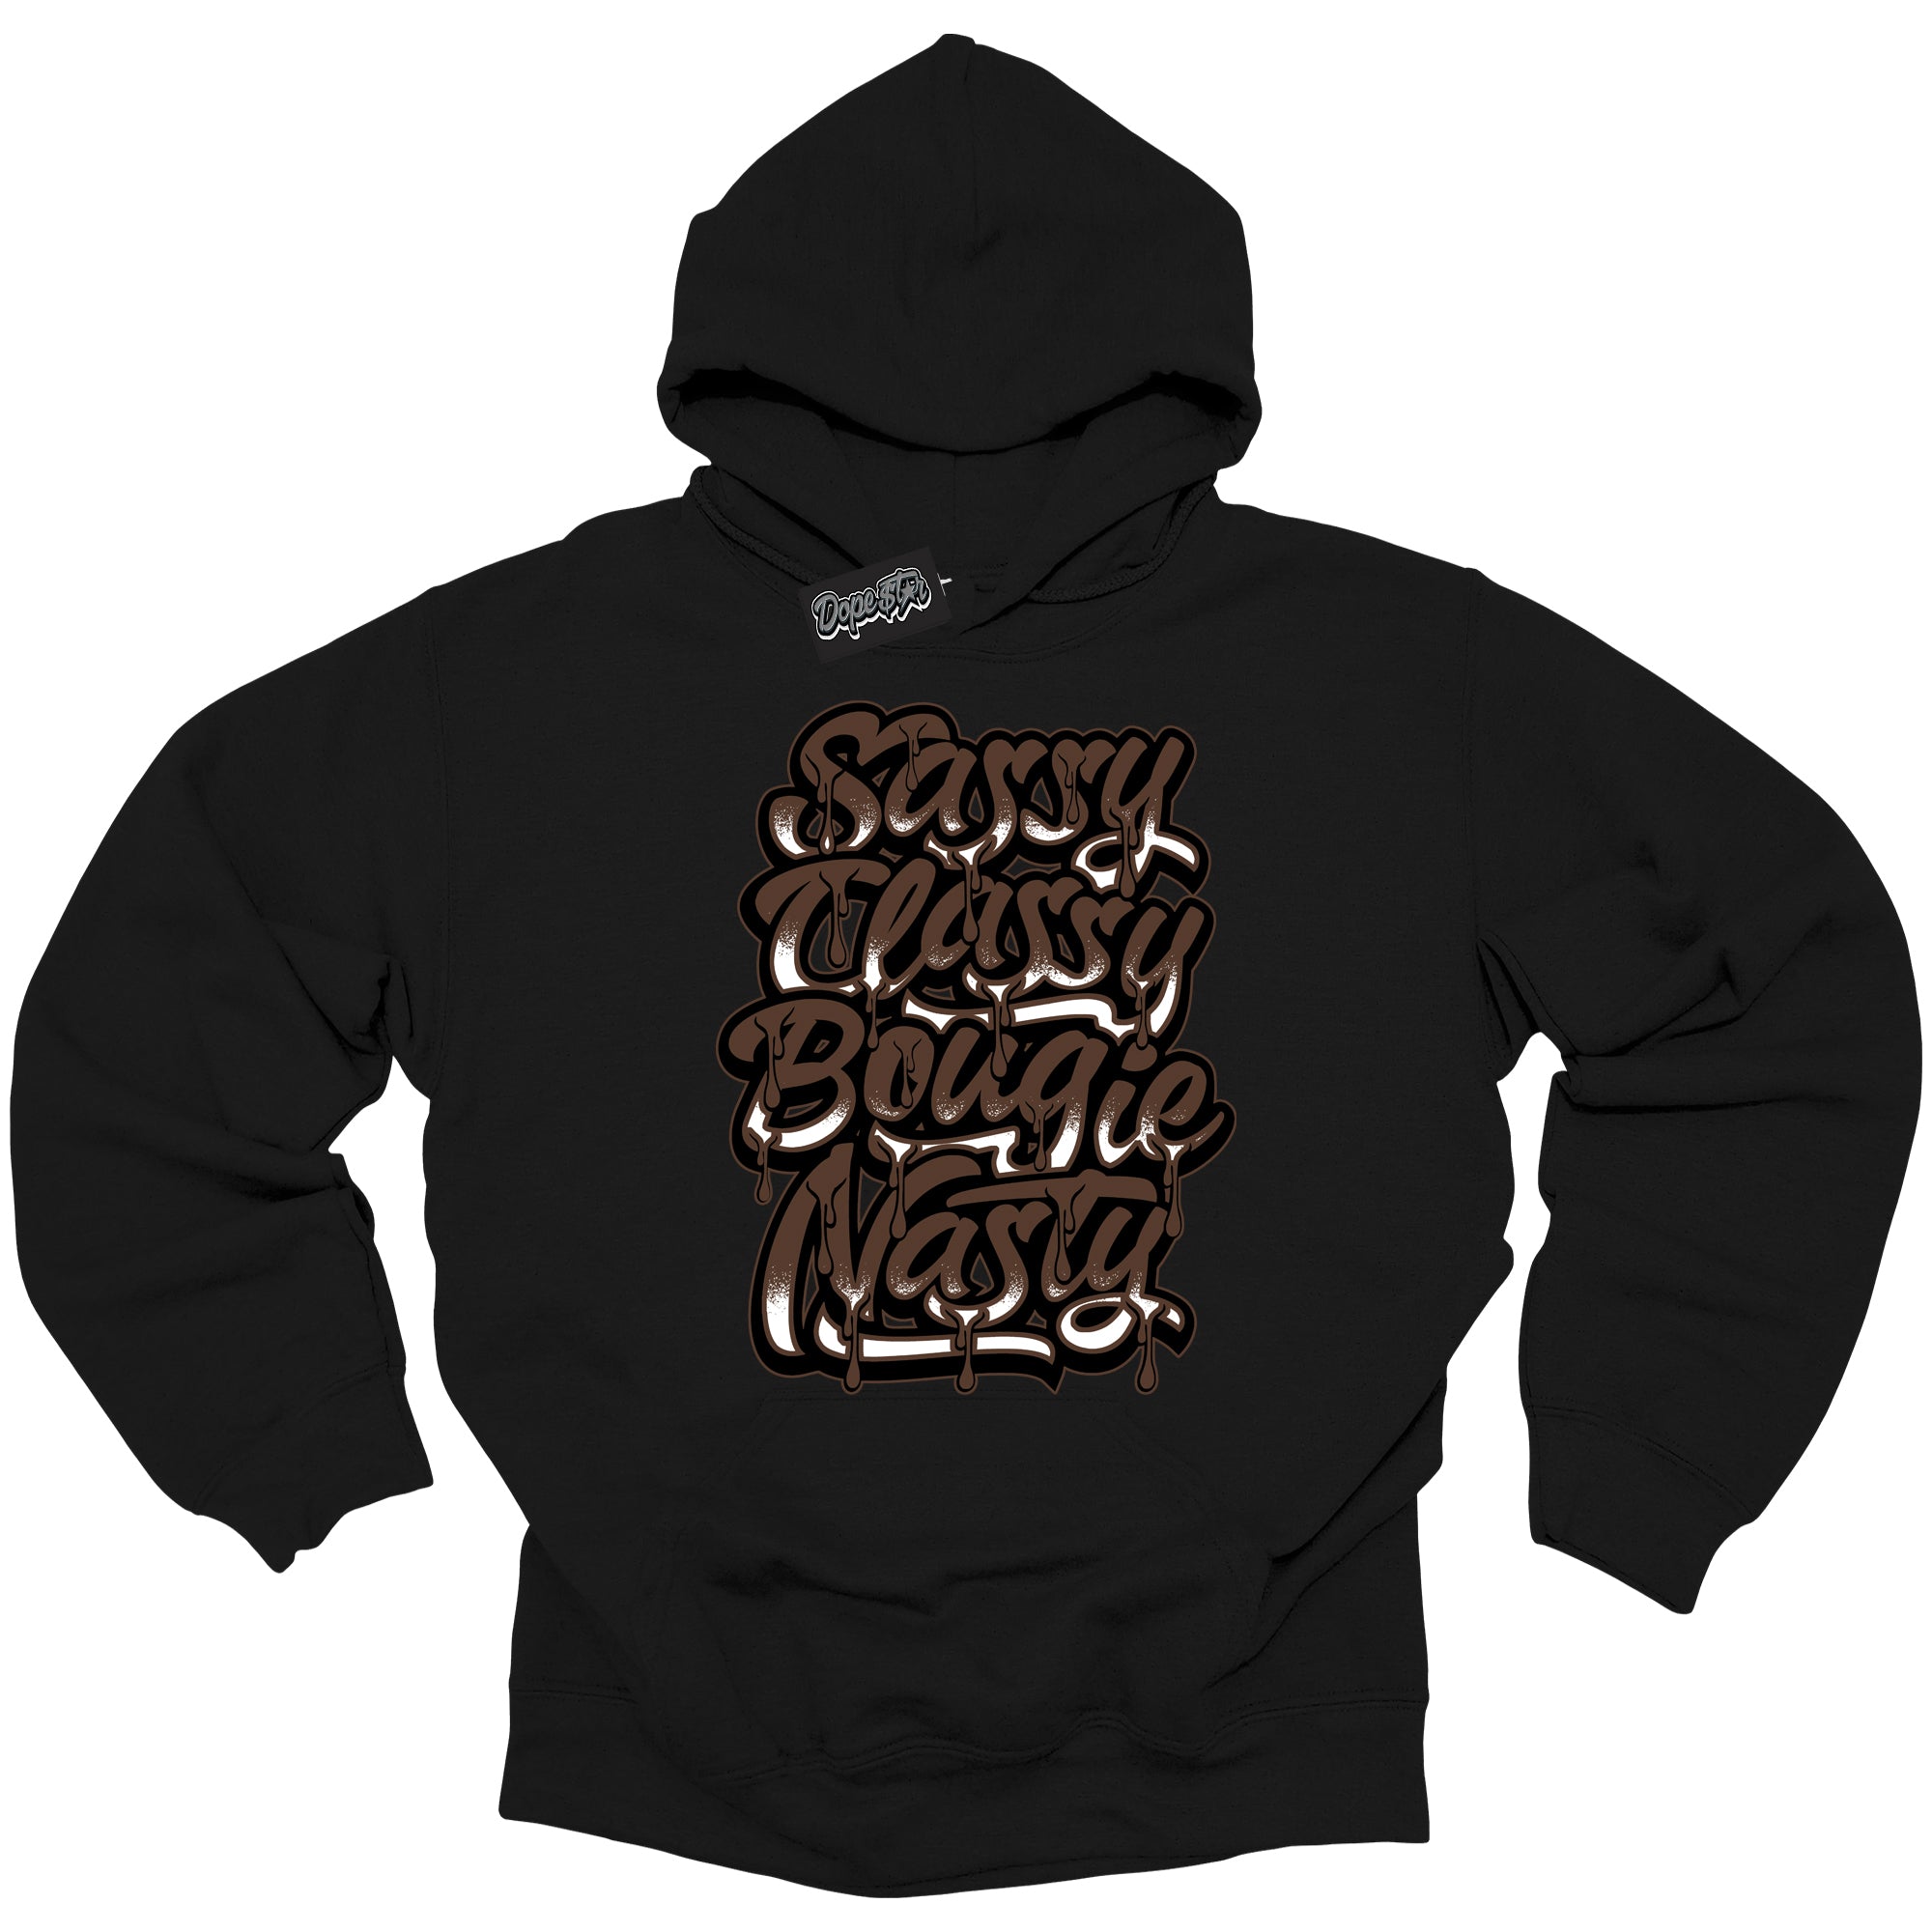 Cool Black Graphic DopeStar Hoodie with “ Sassy Classy “ print, that perfectly matches Palomino 1s sneakers